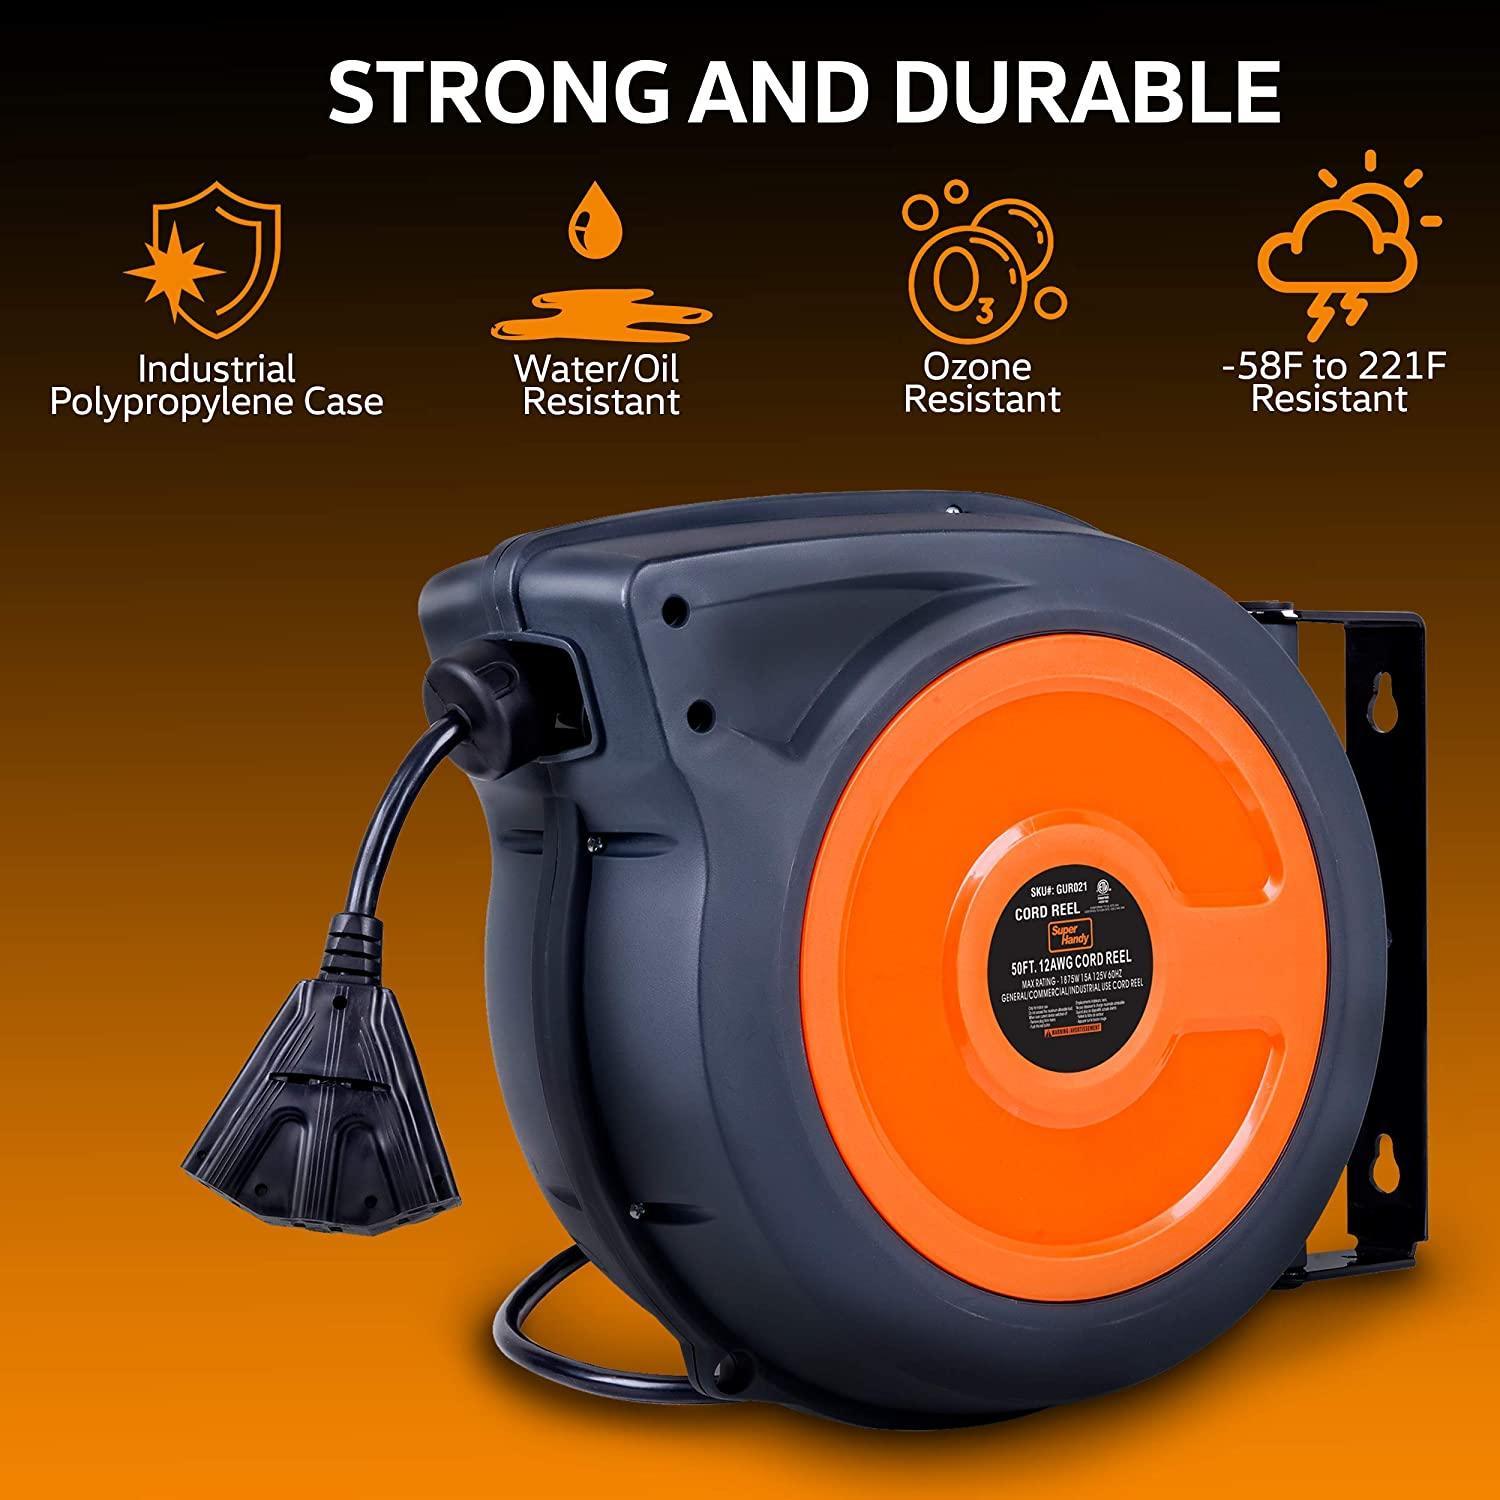 SuperHandy Mountable Retractable Extension Cord Reel - 12AWG x 65' Ft, 3 Grounded Outlets, Max 15A - DIY Tools by GreatCircleUS